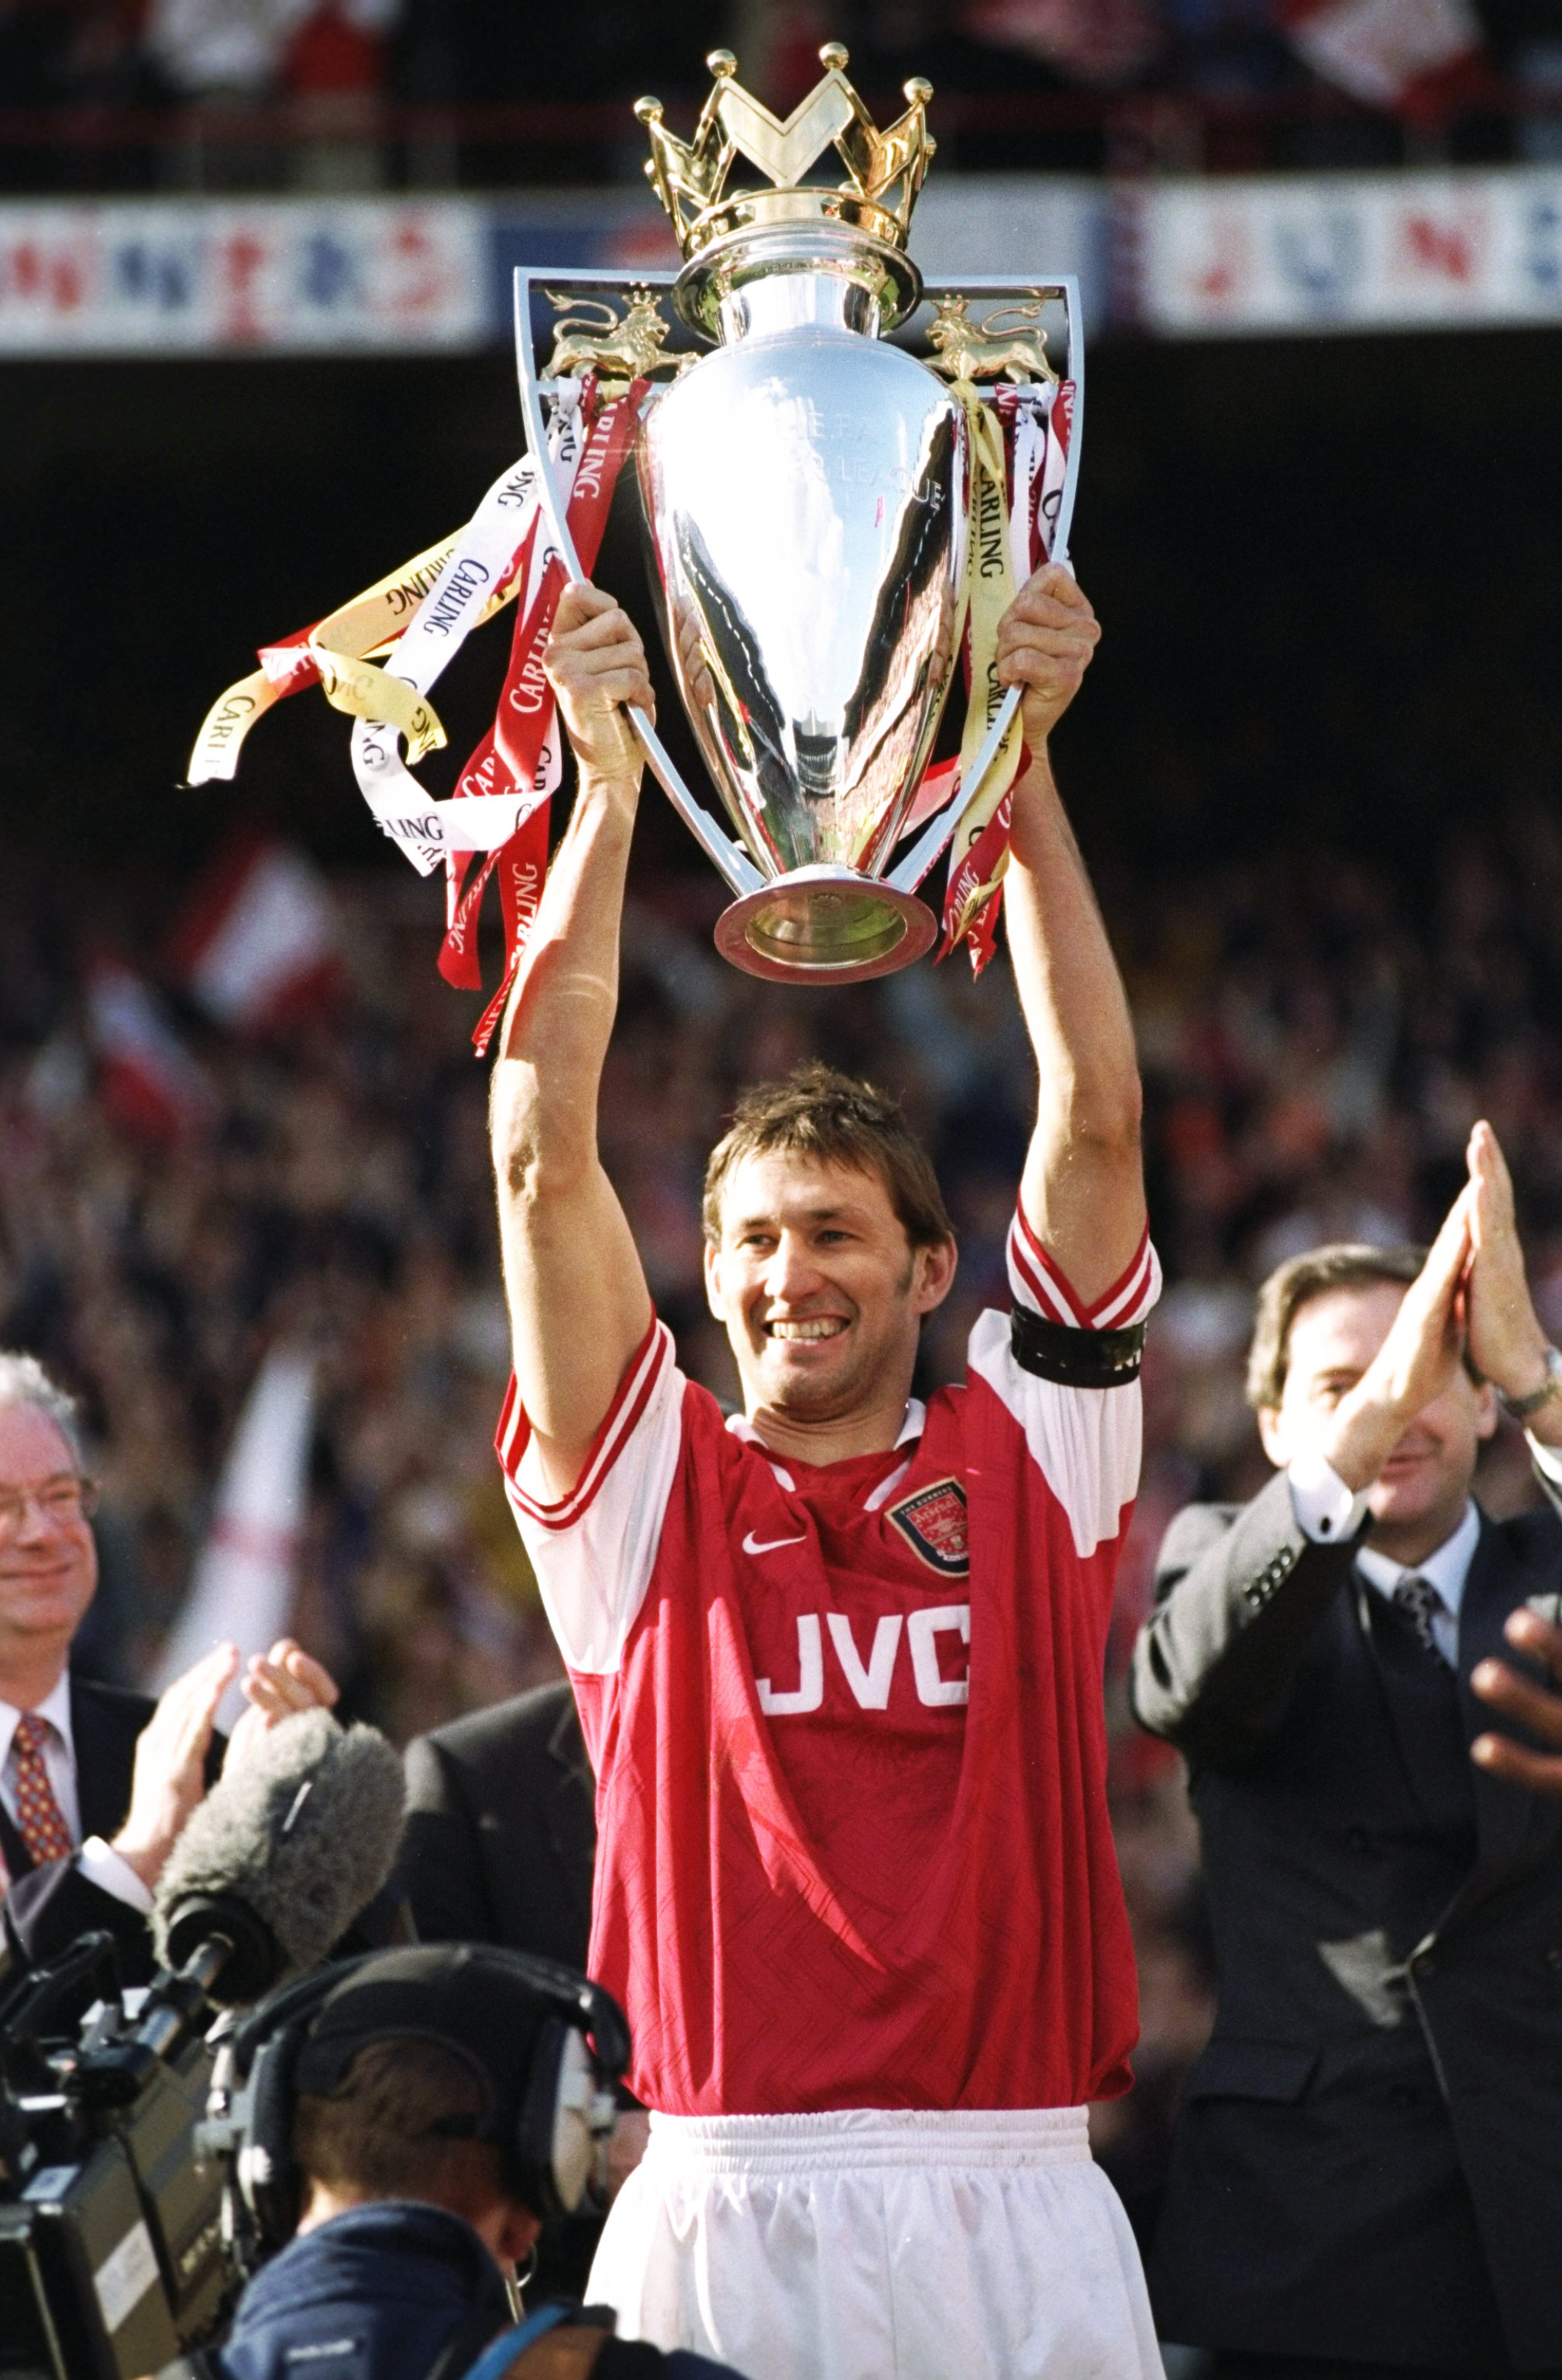 Tony Adams lifting the Premier League title in 1998